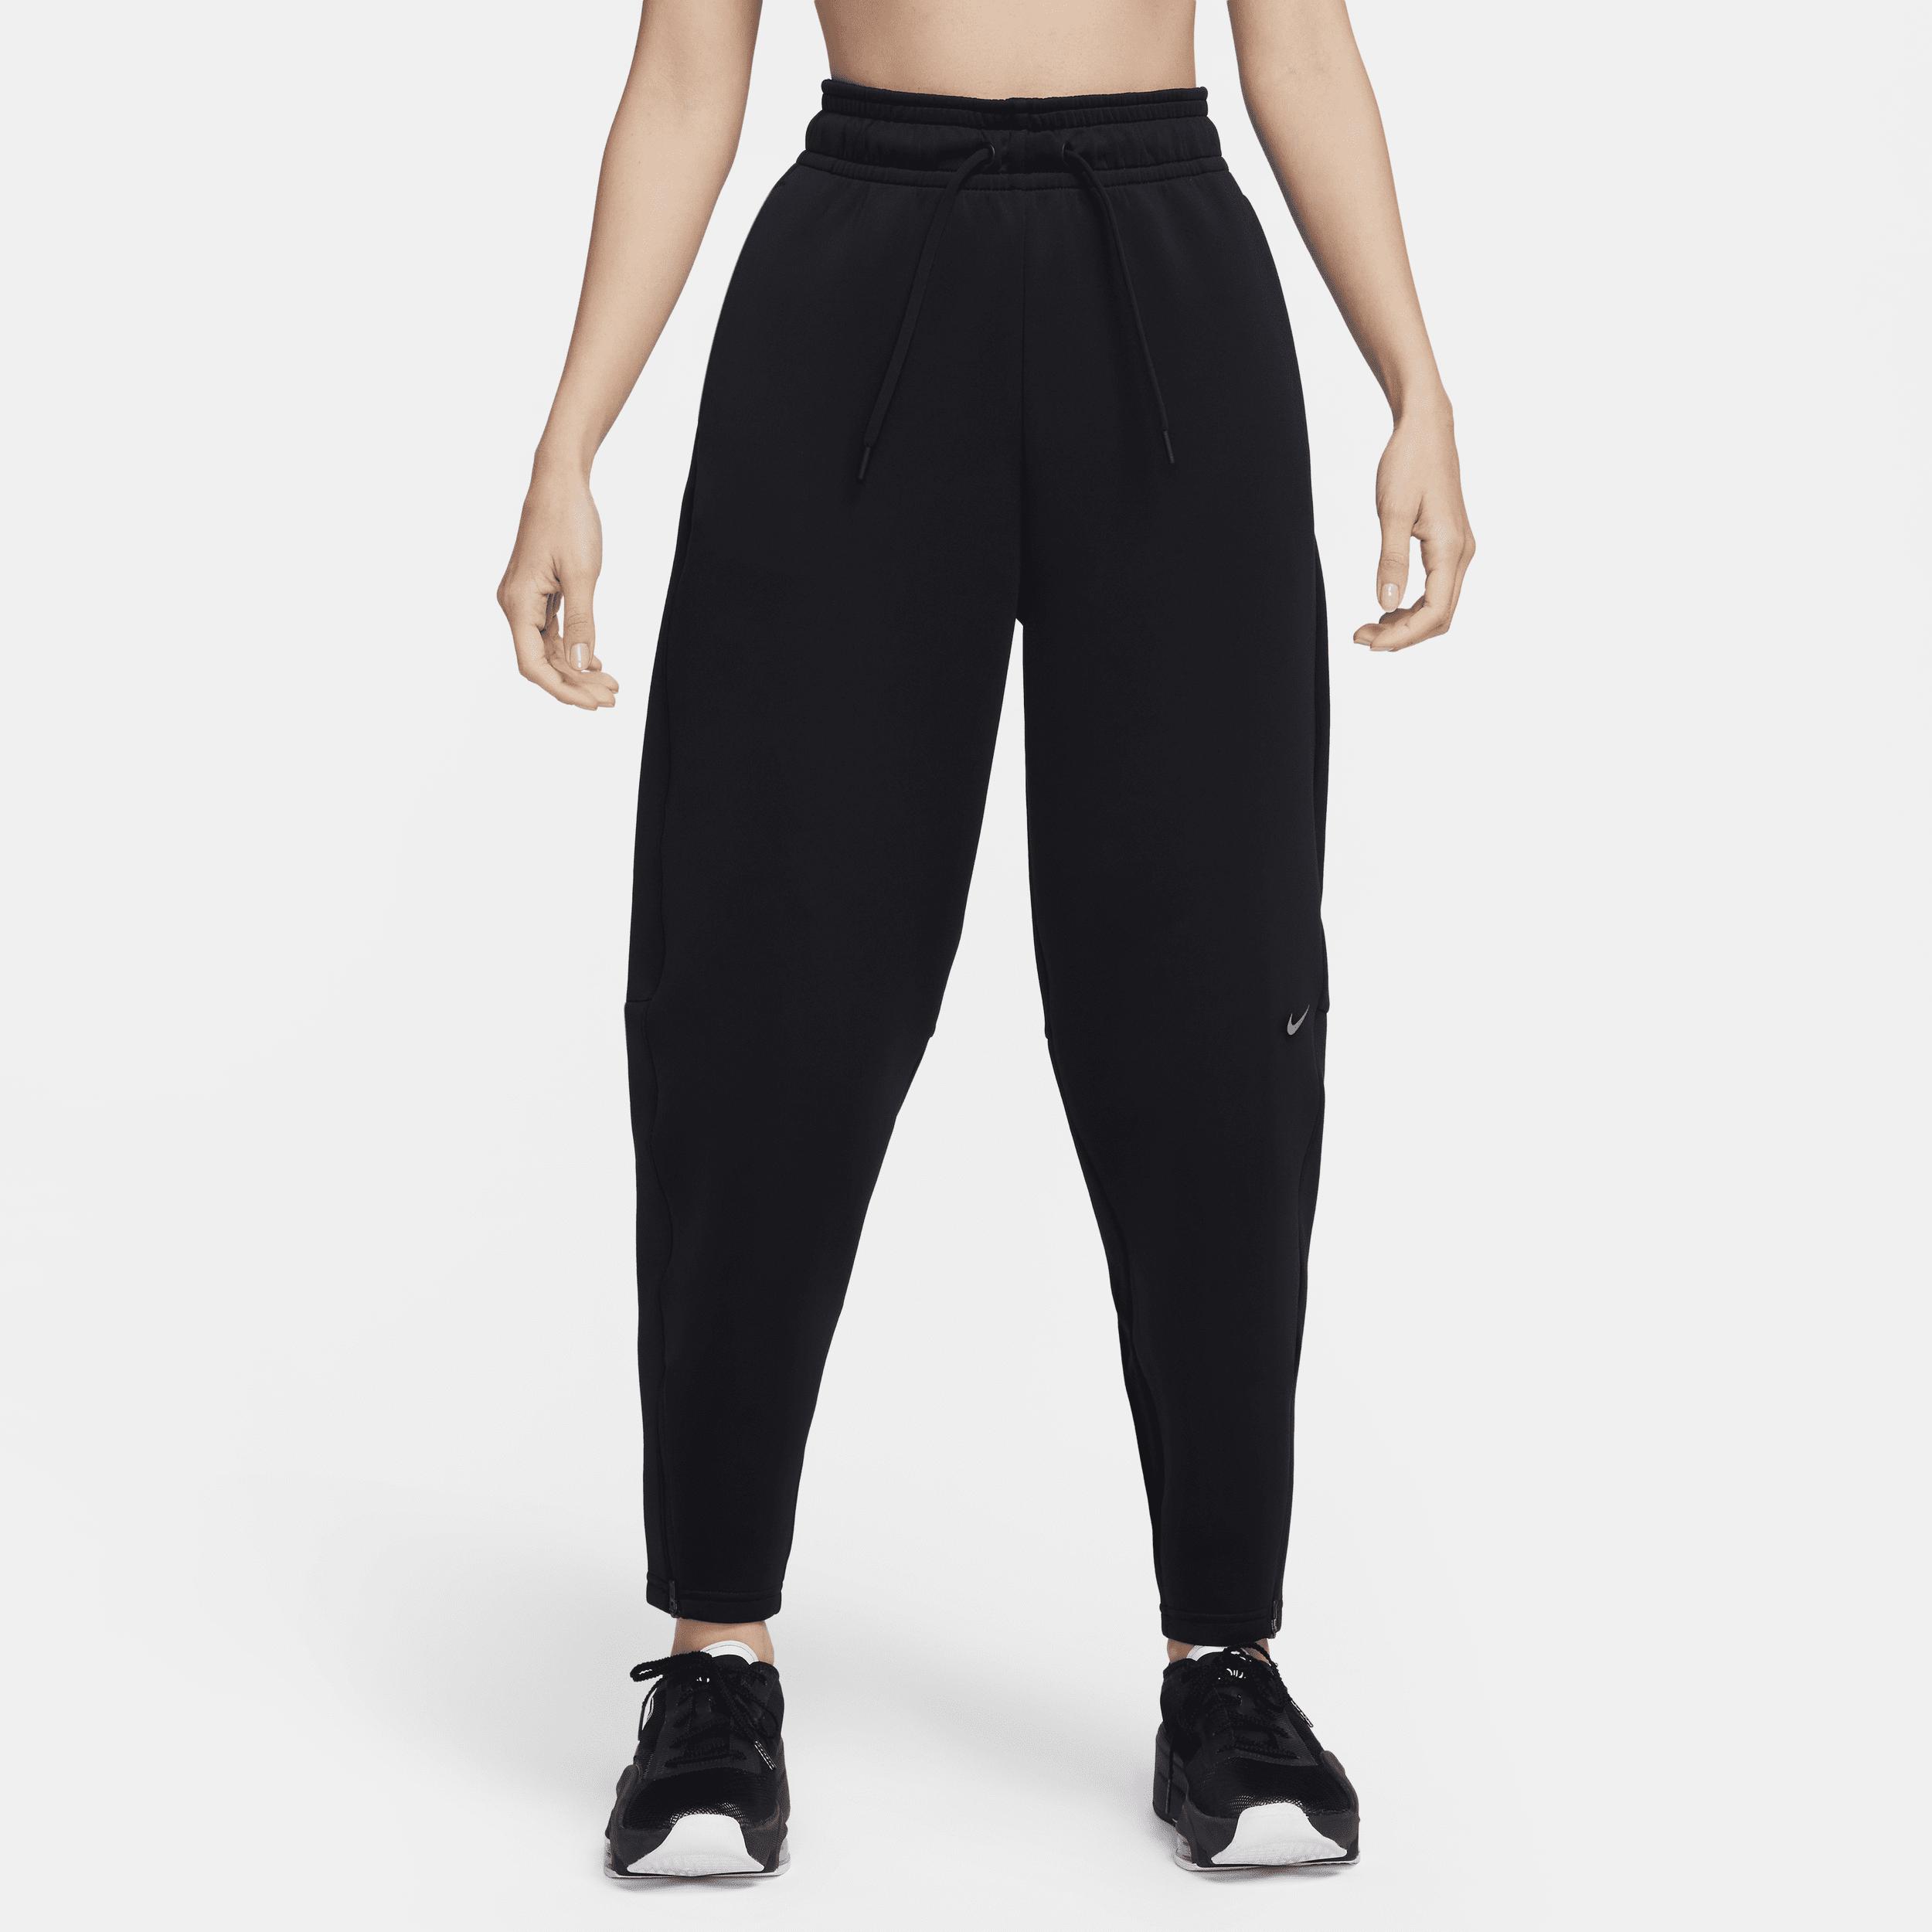 Nike Dri-fit Prima High-waisted 7/8 Training Pants in Black